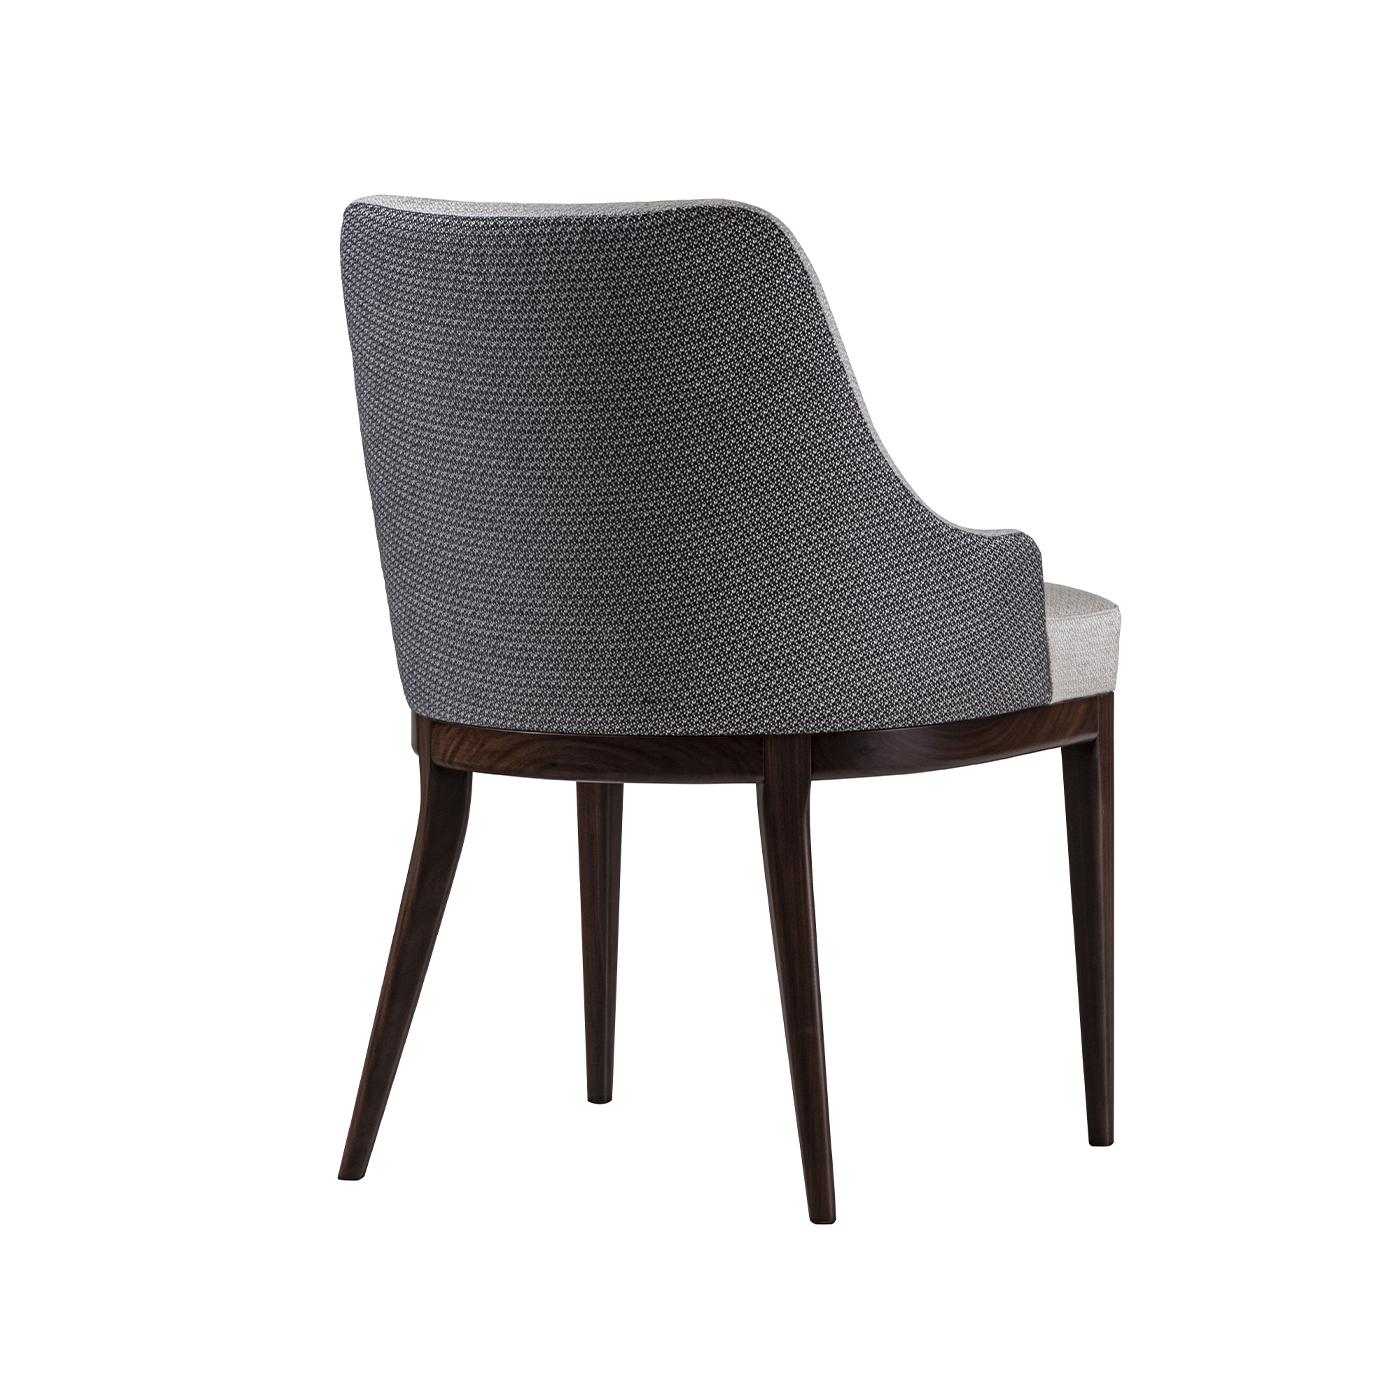 Contemporary Adele White Dining Chair